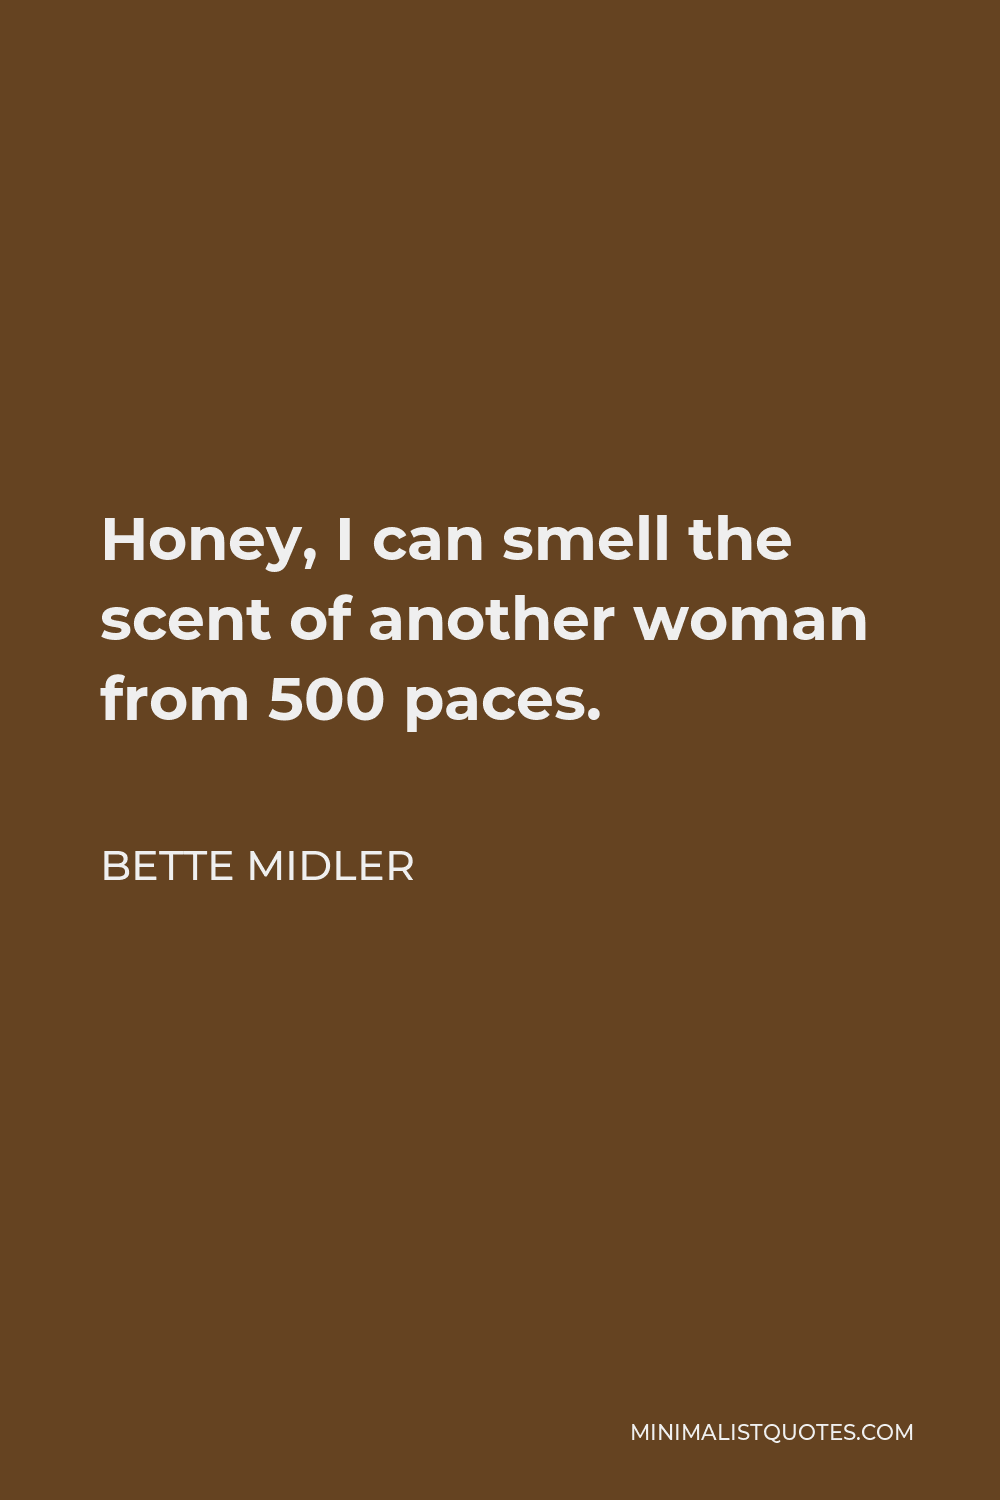 Bette Midler Quote - Honey, I can smell the scent of another woman from 500 paces.